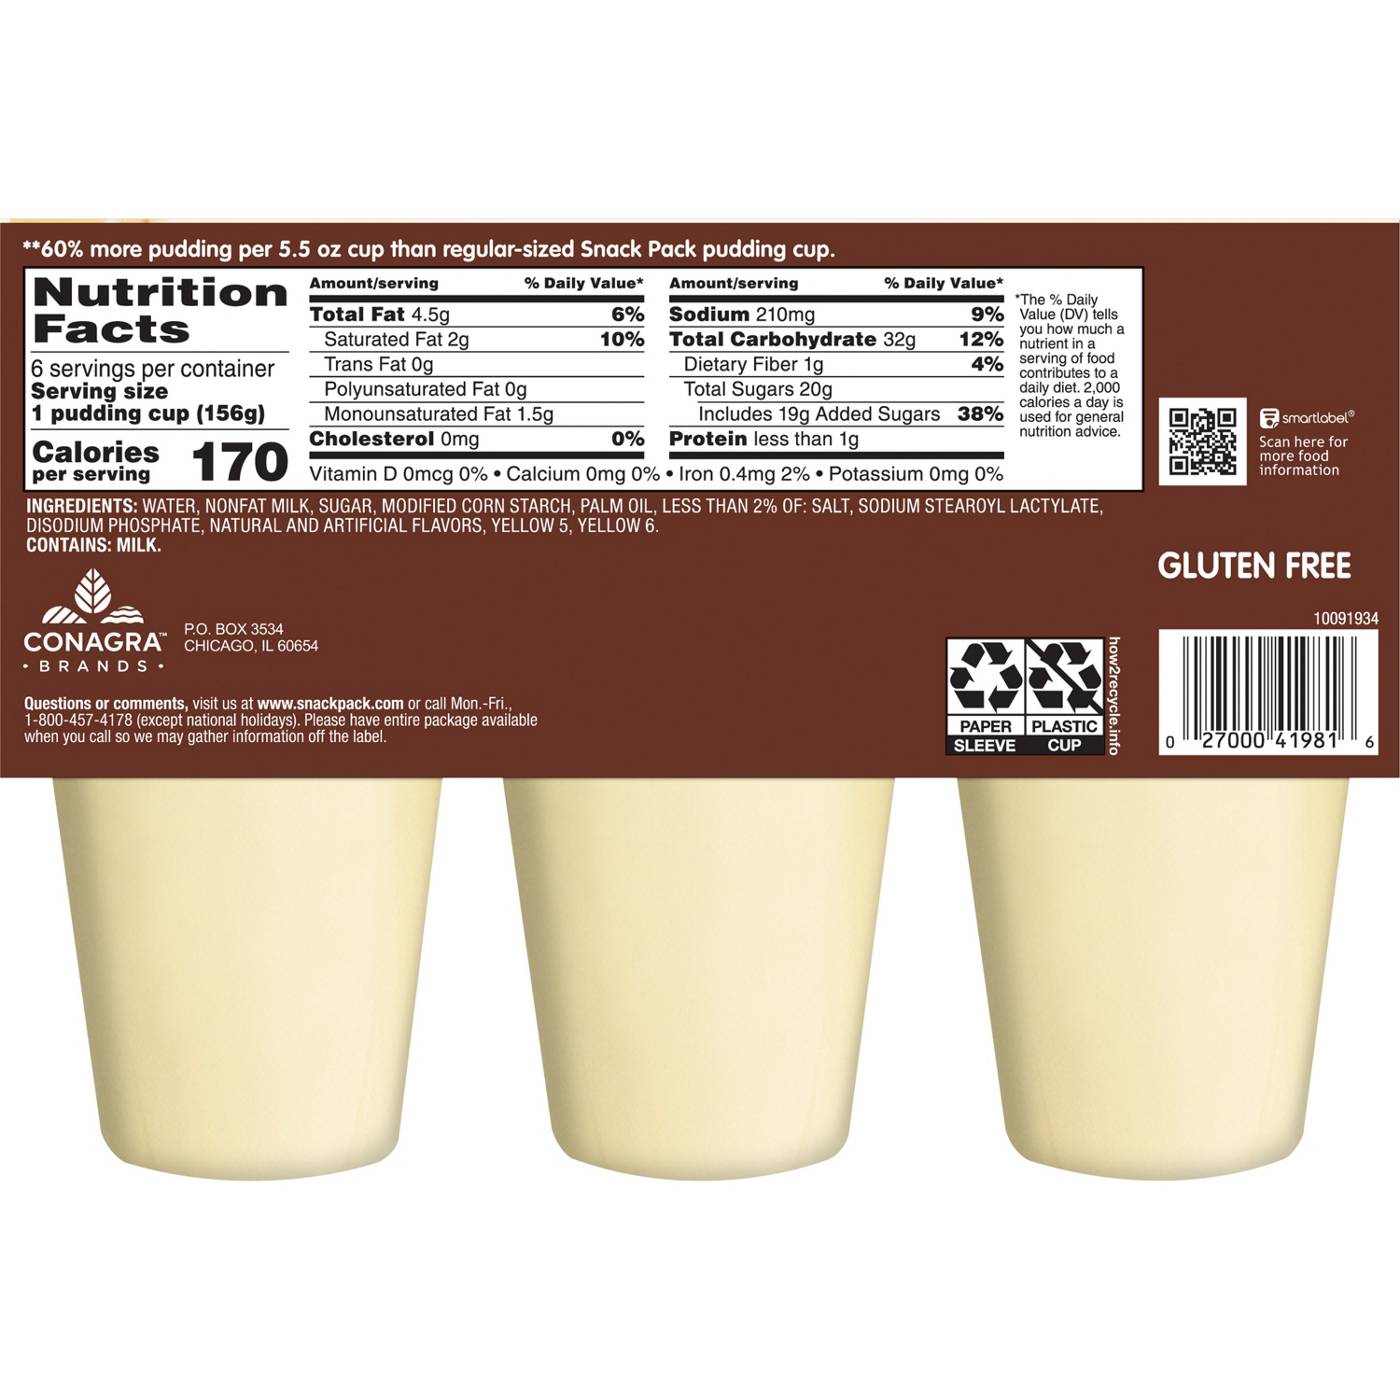 Snack Pack Super Size Vanilla Pudding Cups; image 2 of 7